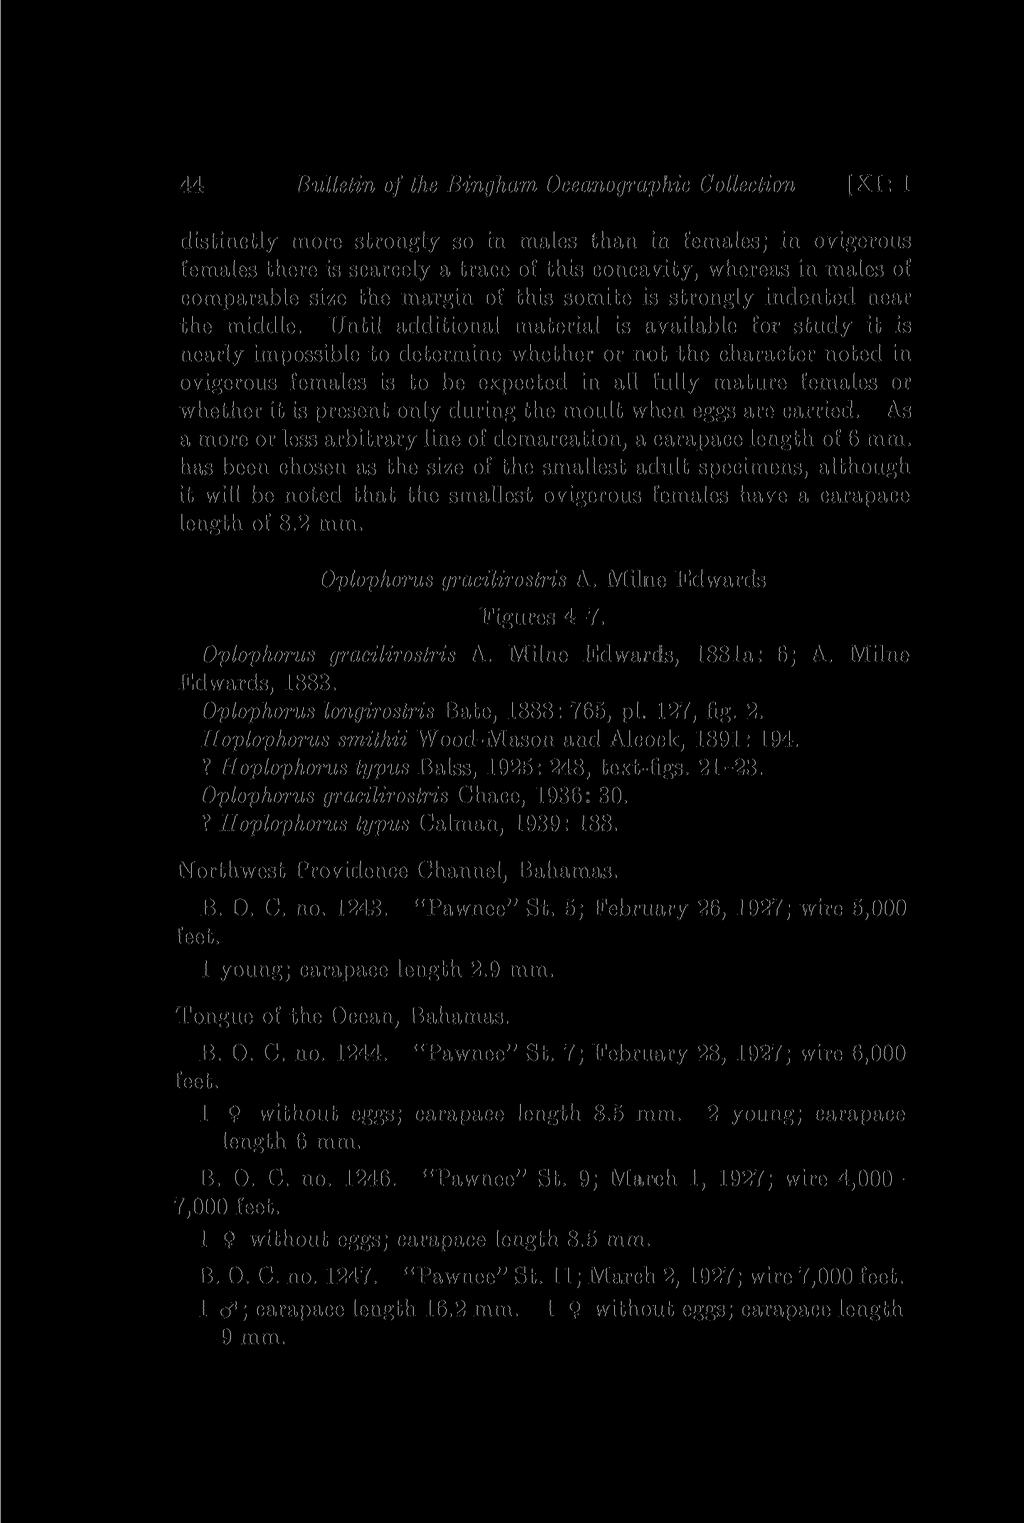 44 Bulletin of the Bingham, Oceanographic Collection [XI: 1 distinctly more strongly so in males than in females; in ovigerous females there is scarcely a trace of this concavity, whereas in males of